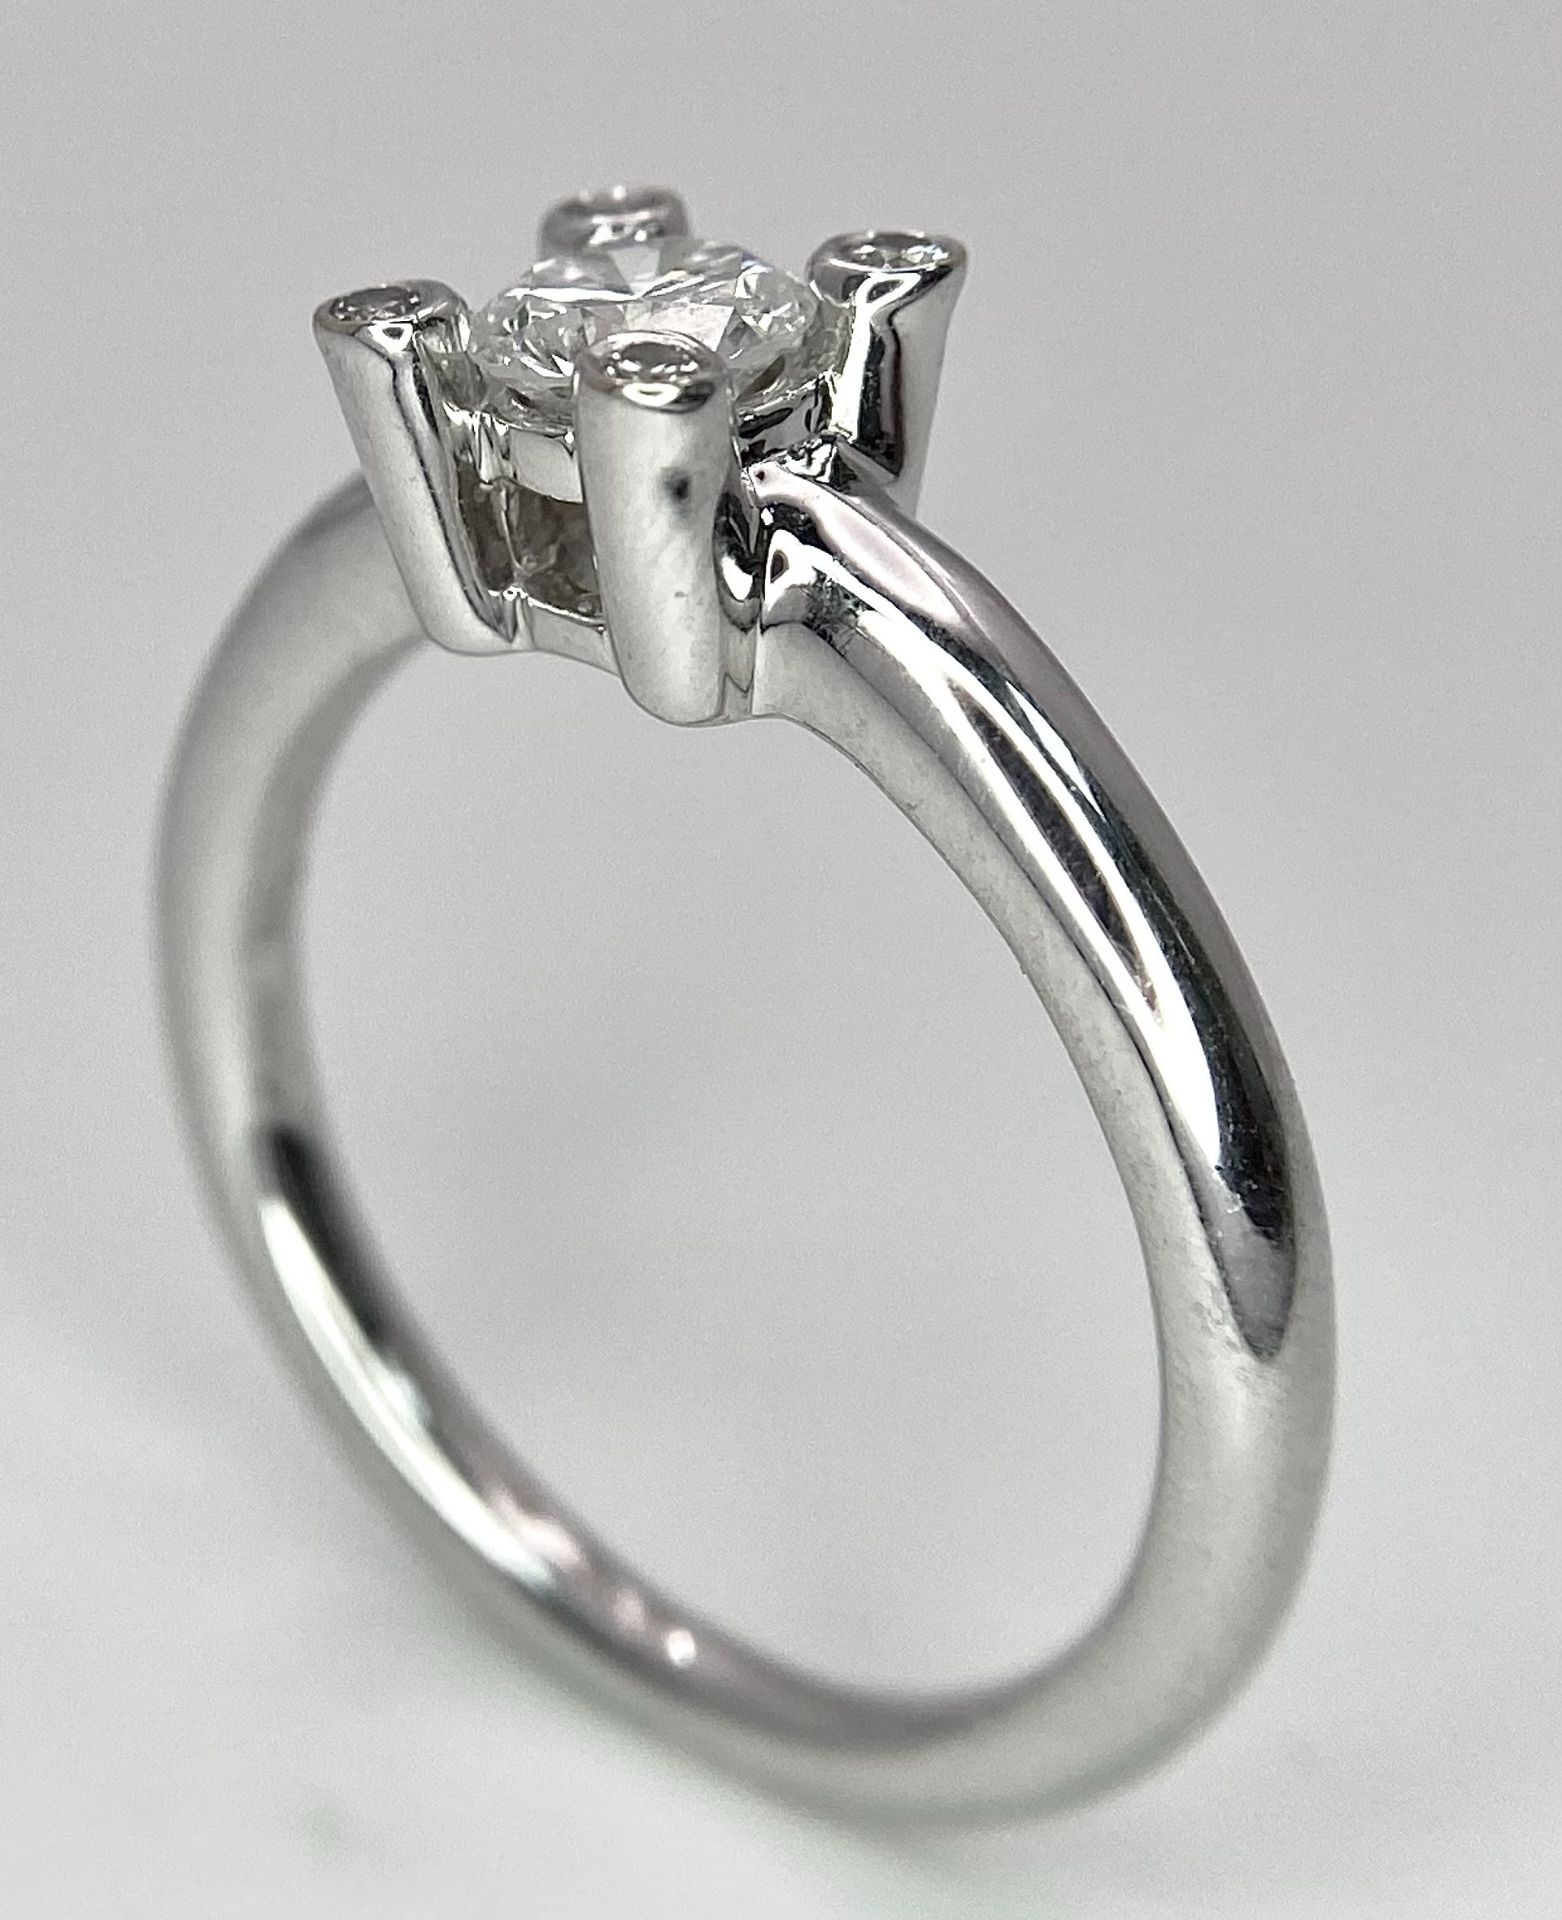 AN 18K WHITE GOLD DIAMOND SOLITAIRE RING WITH FOUR DIAMOND TURRETS - 0.50CT 4.6G. SIZE M 1/2. - Image 7 of 10